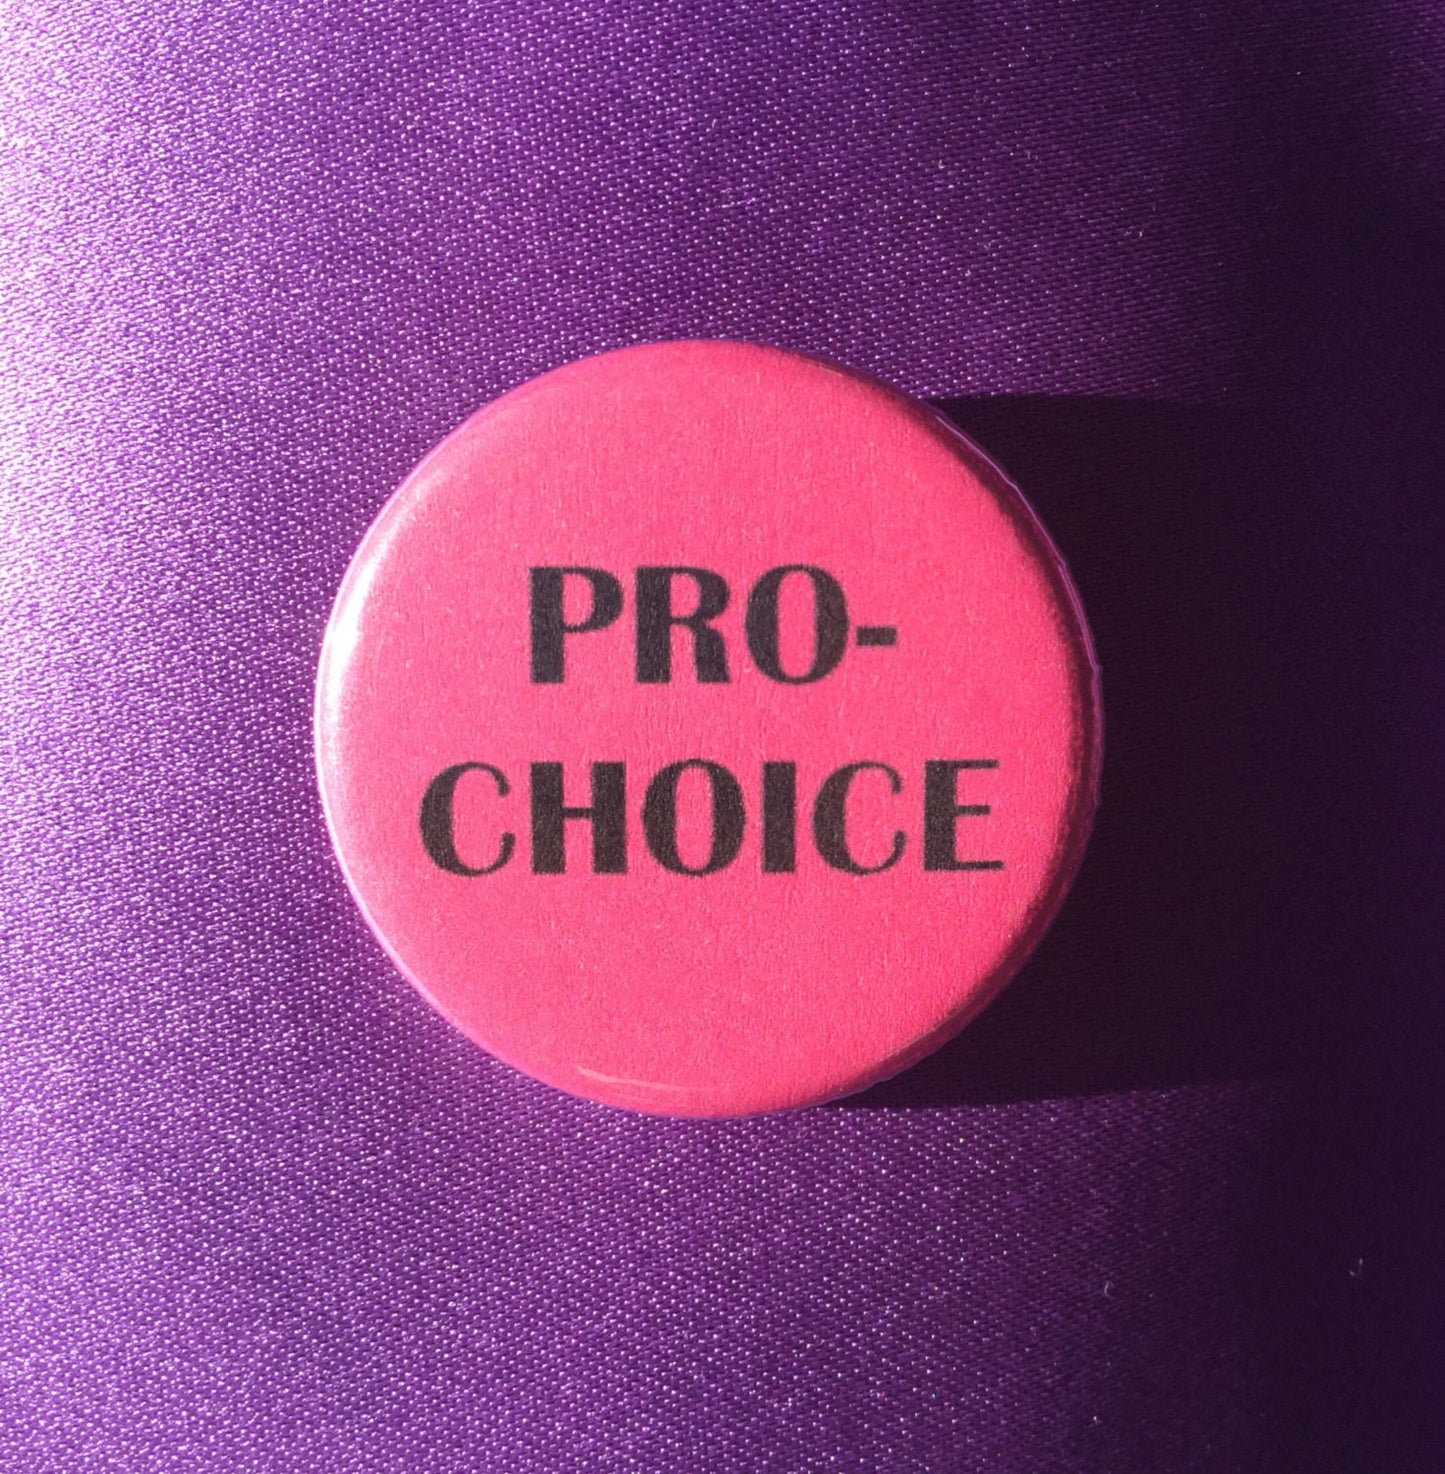 Pro-choice button - Radical Buttons